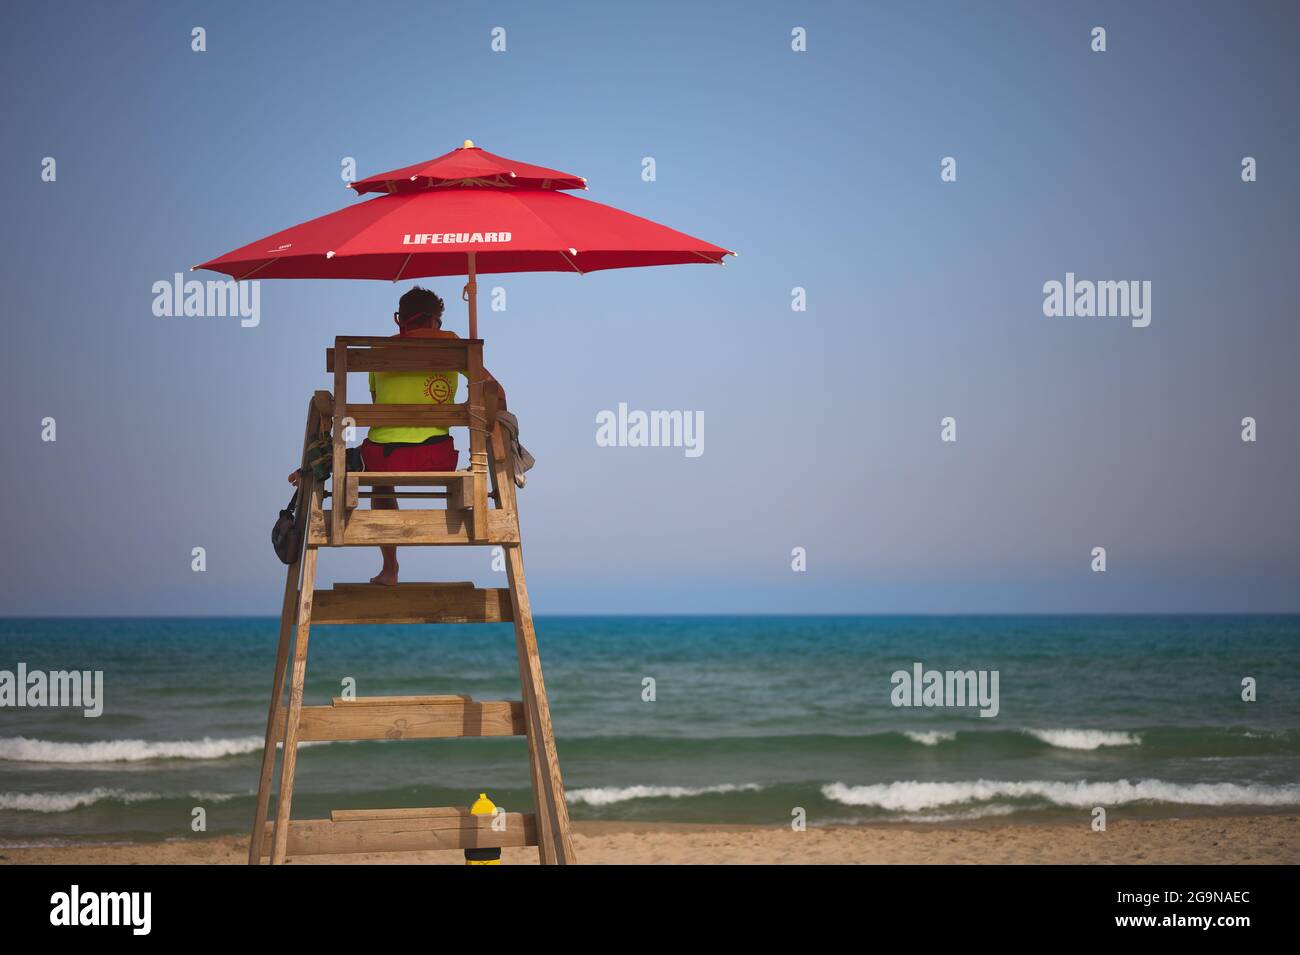 detail of a lifeguard at a lookout point on a beach with the sea and blue sky in the background Stock Photo